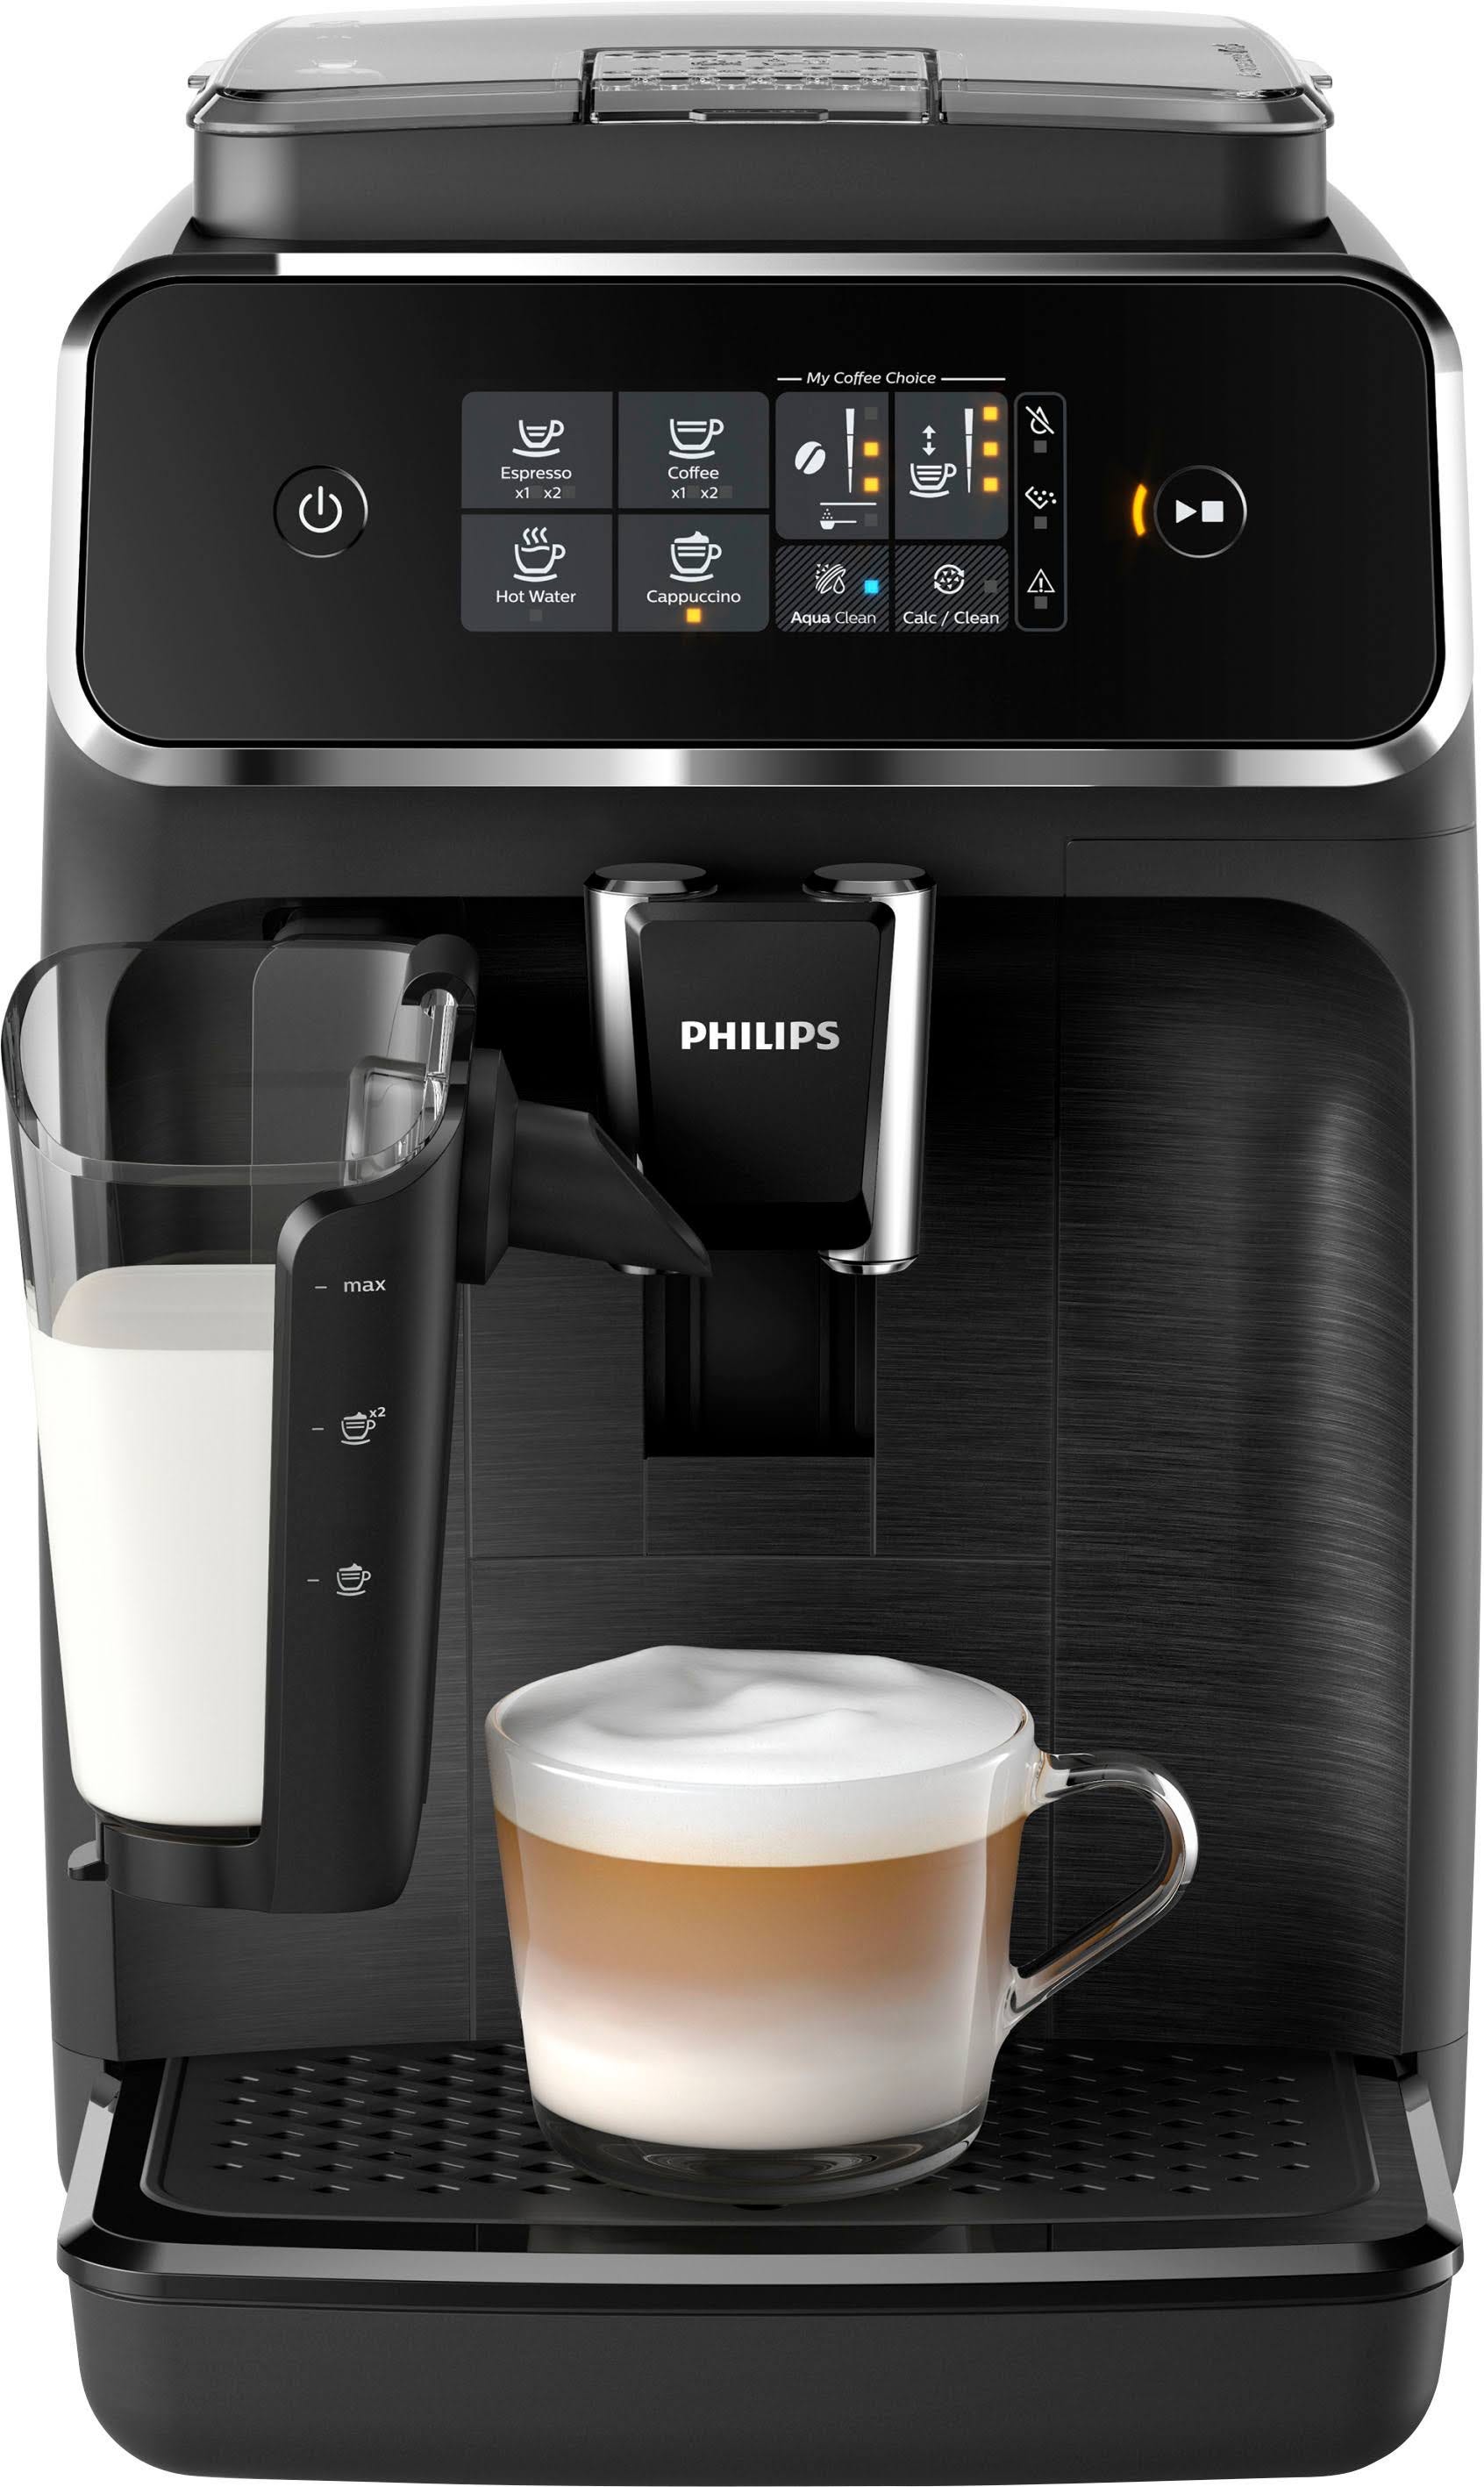 Philips 2200 Series Fully Automatic Espresso Machine for Home | Image